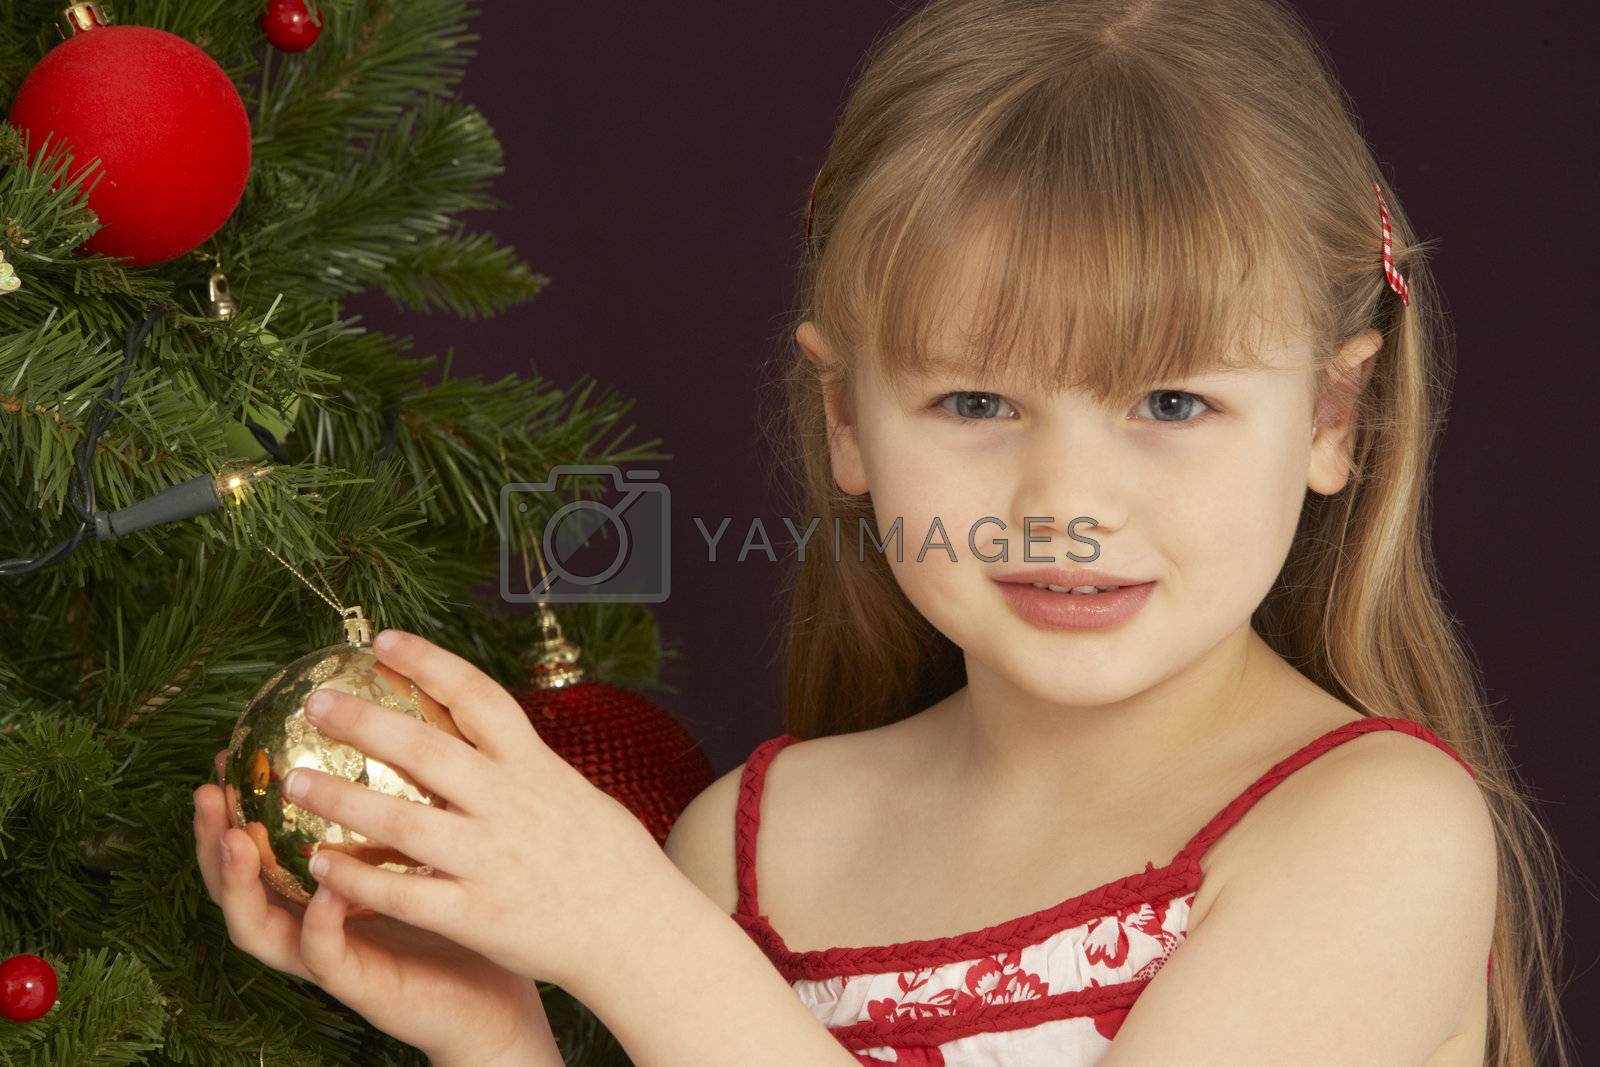 Royalty free image of Portrait of a little child by omg_images